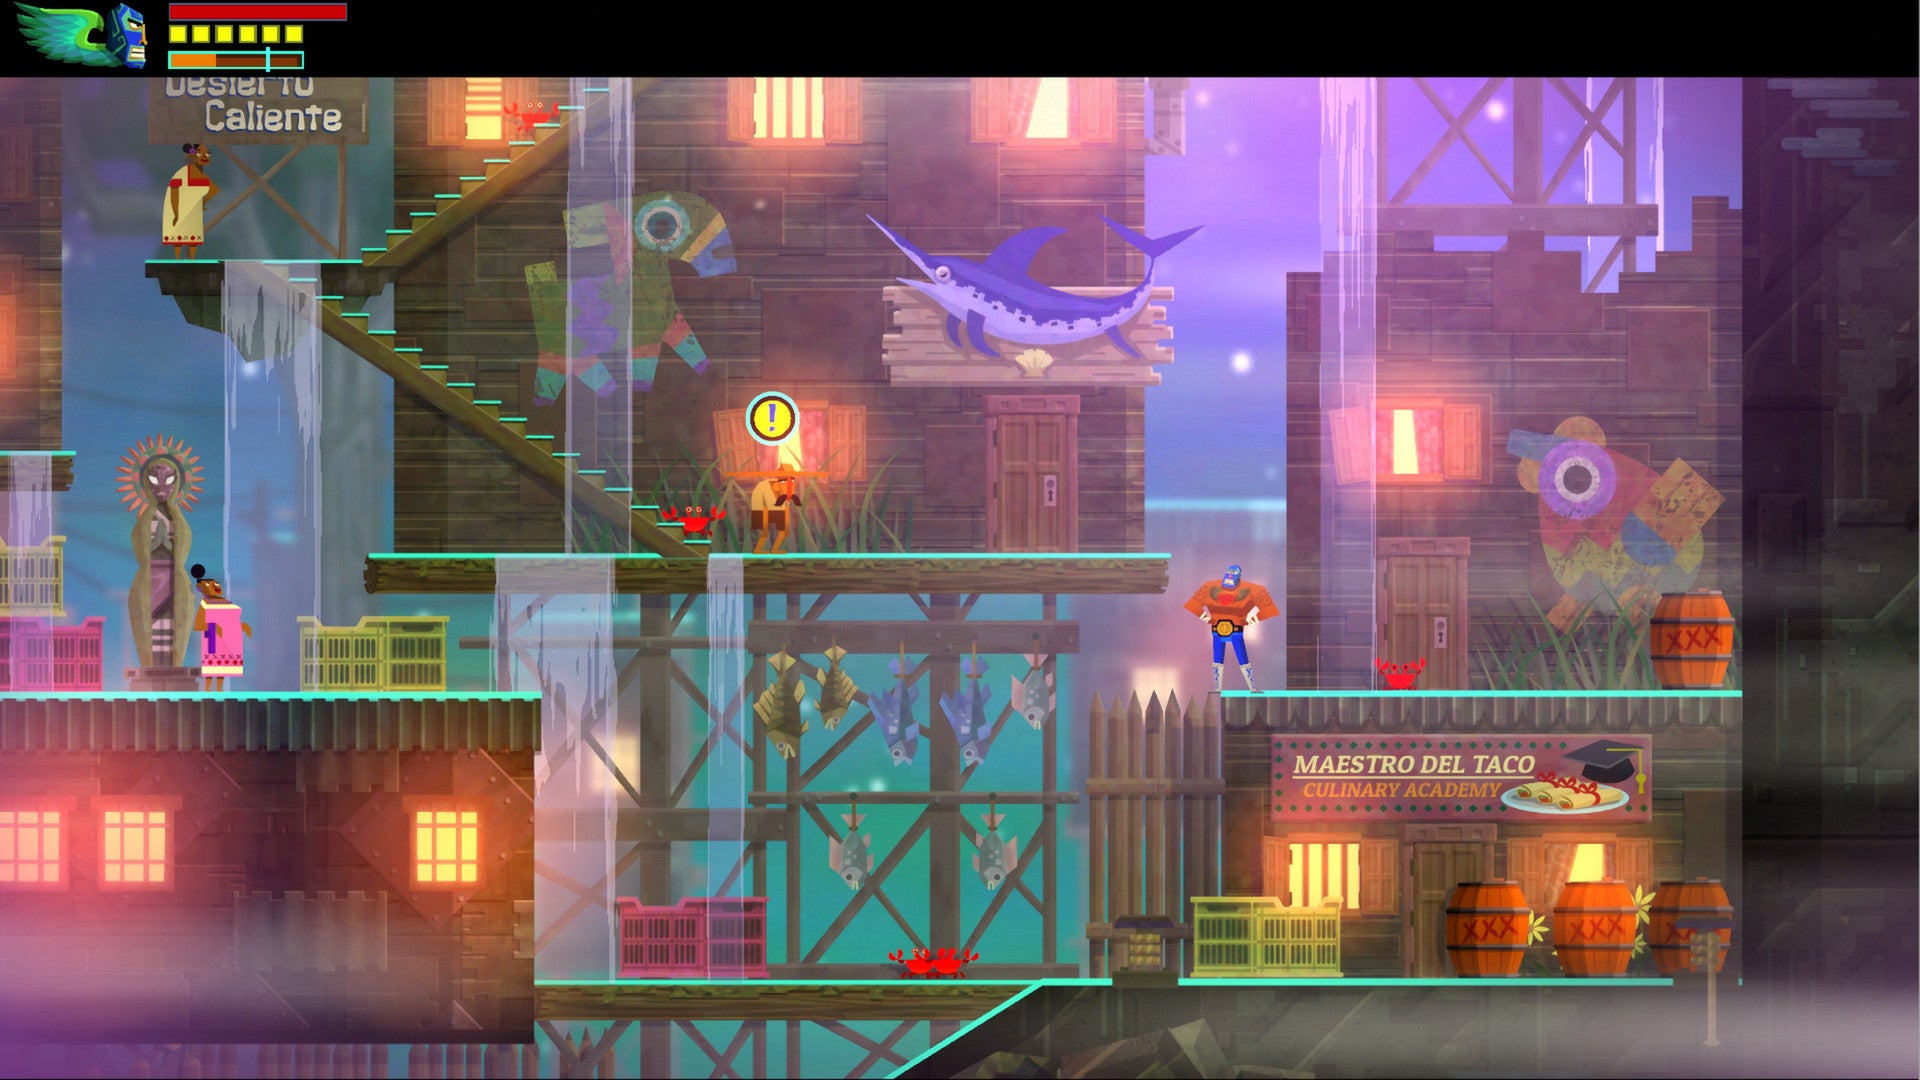 Hanging out round town in a Guacamelee screenshot.